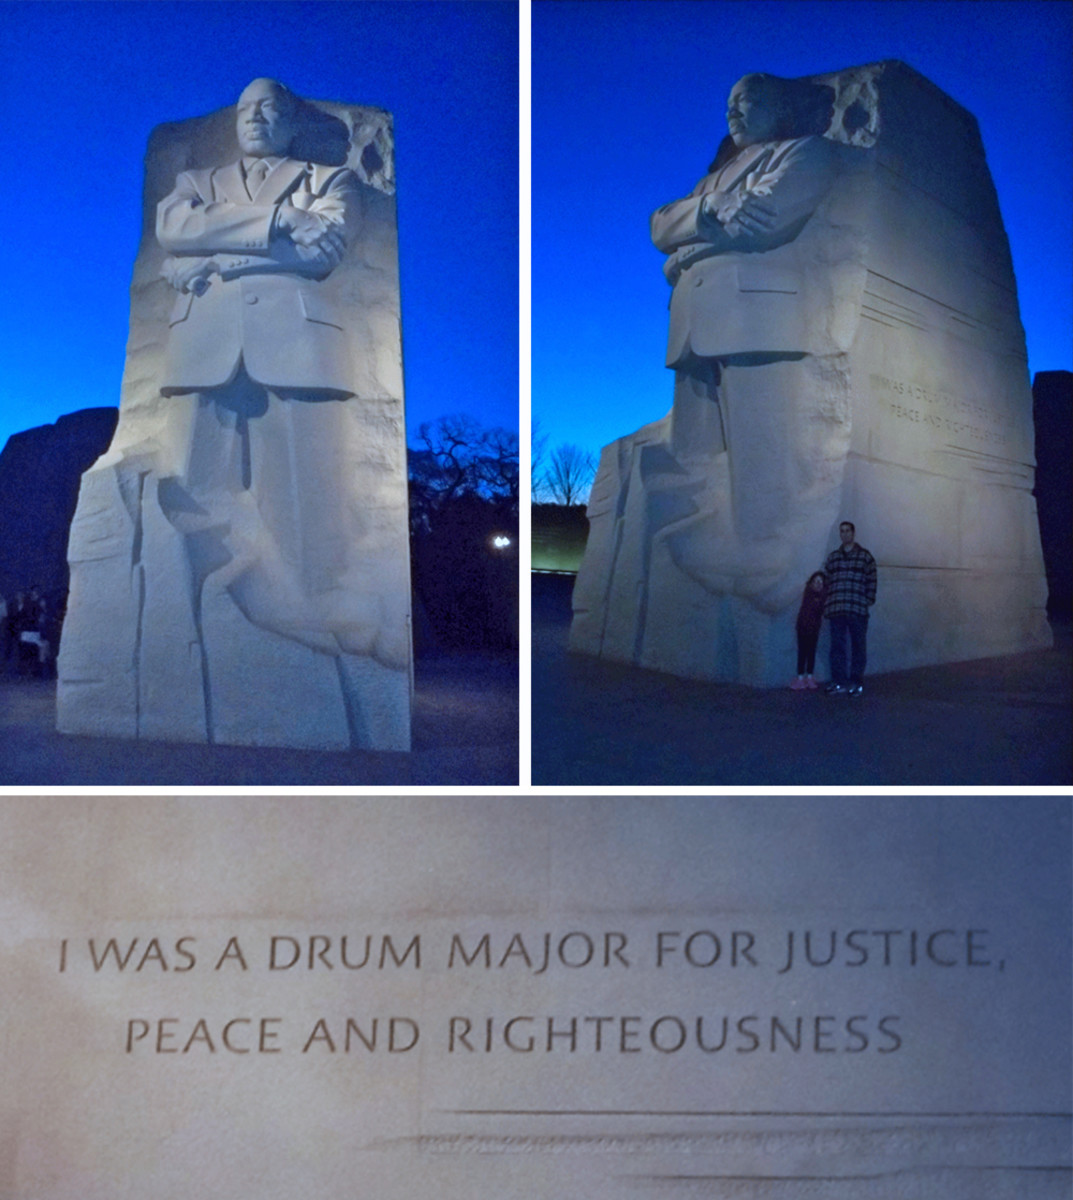 The Martin Luther King Jr. memorial had not been built yet when we visited in 2008.  These photos are from our 2013 visit.